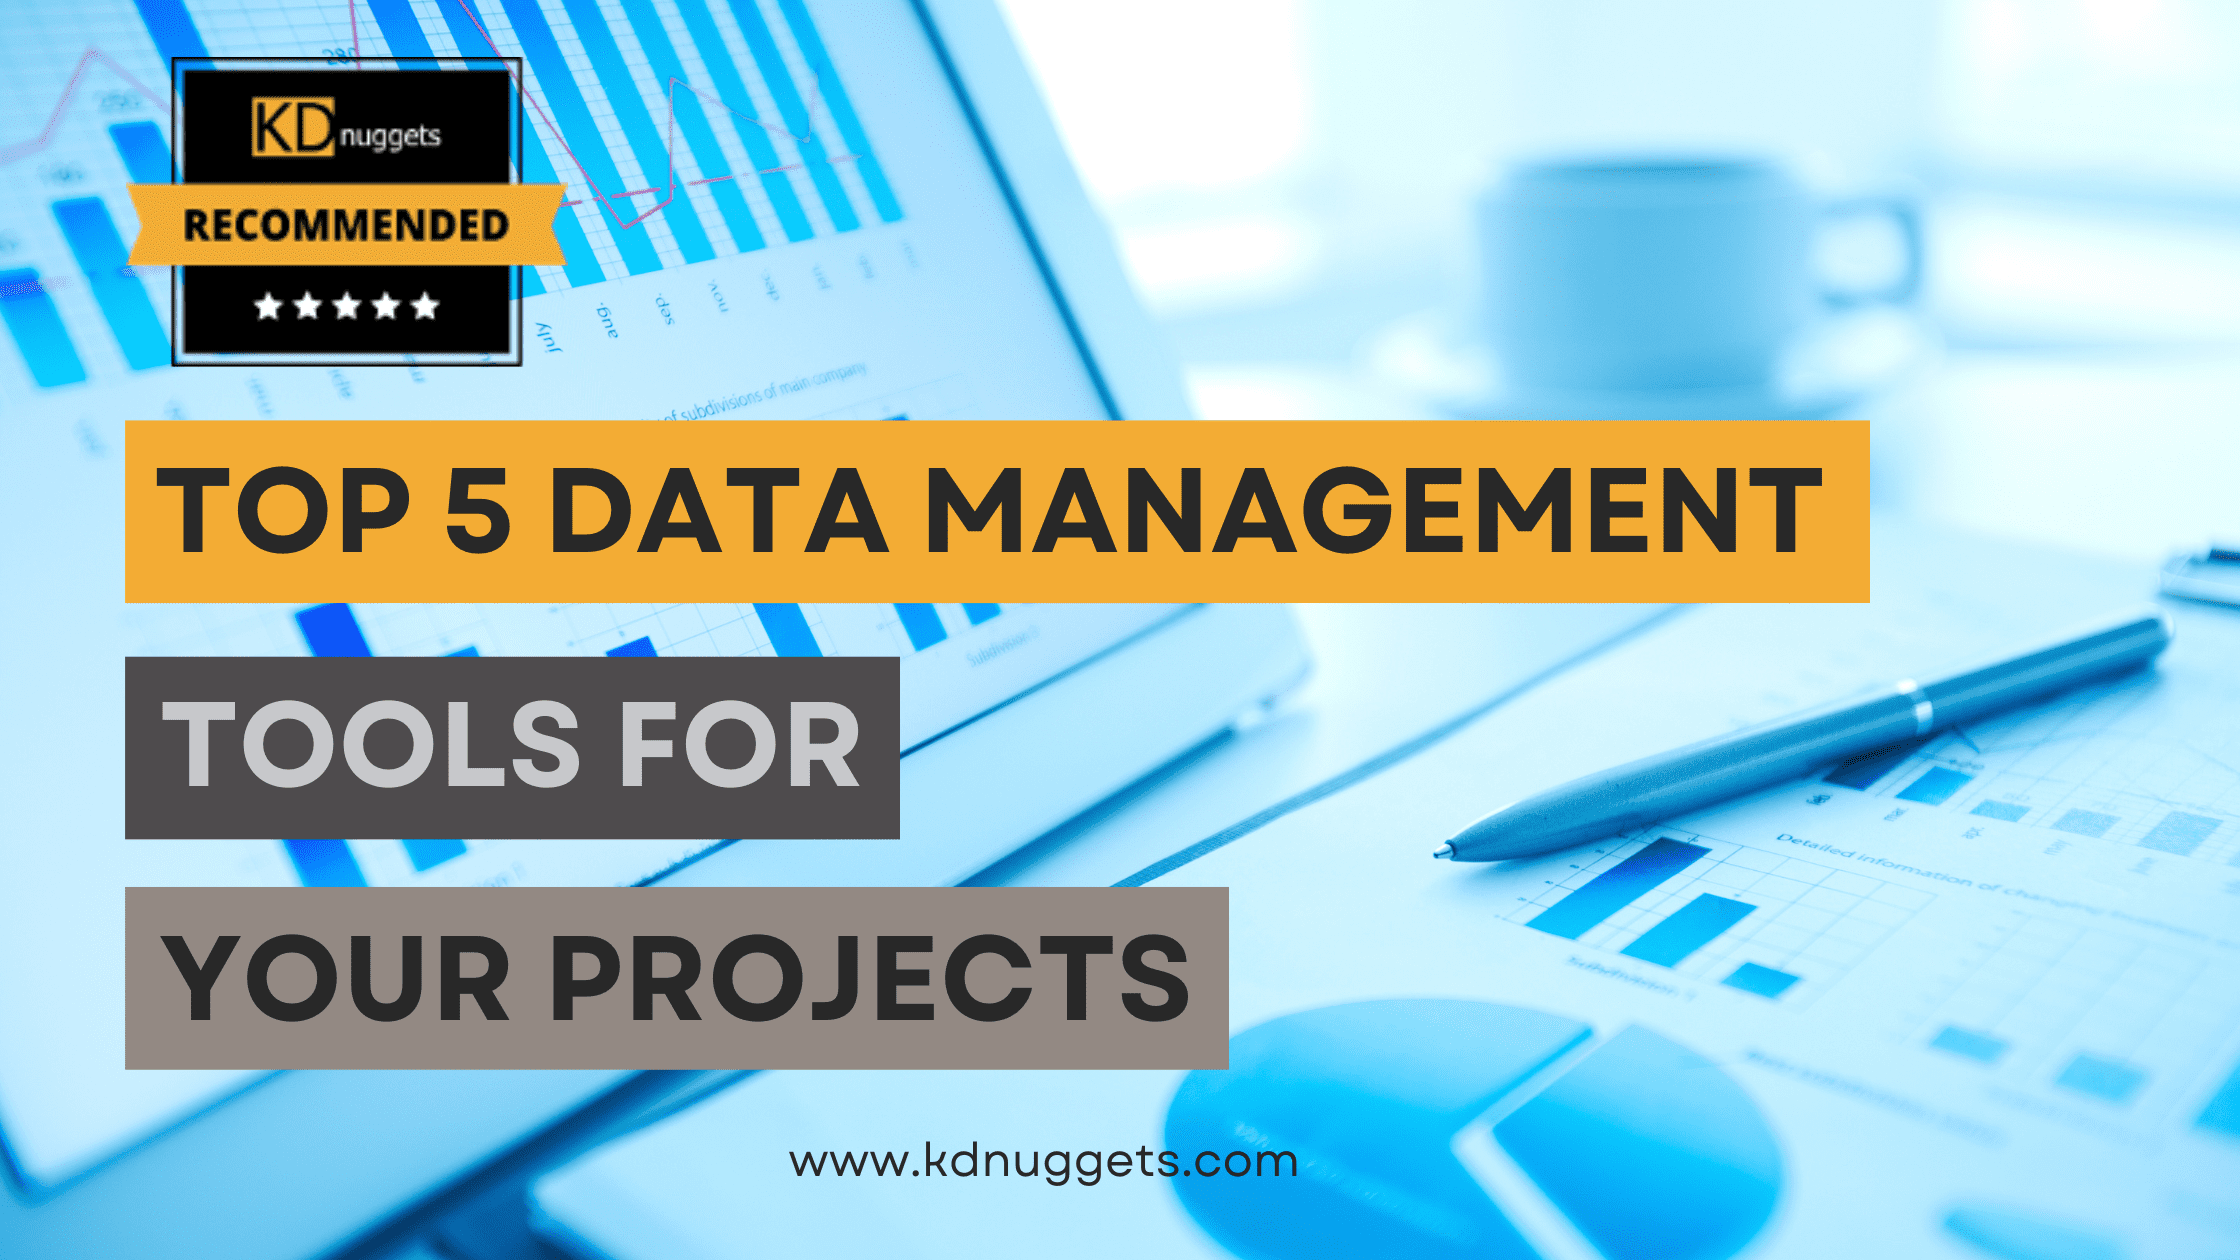 The Top 5 Data Management Tools For Your Projects